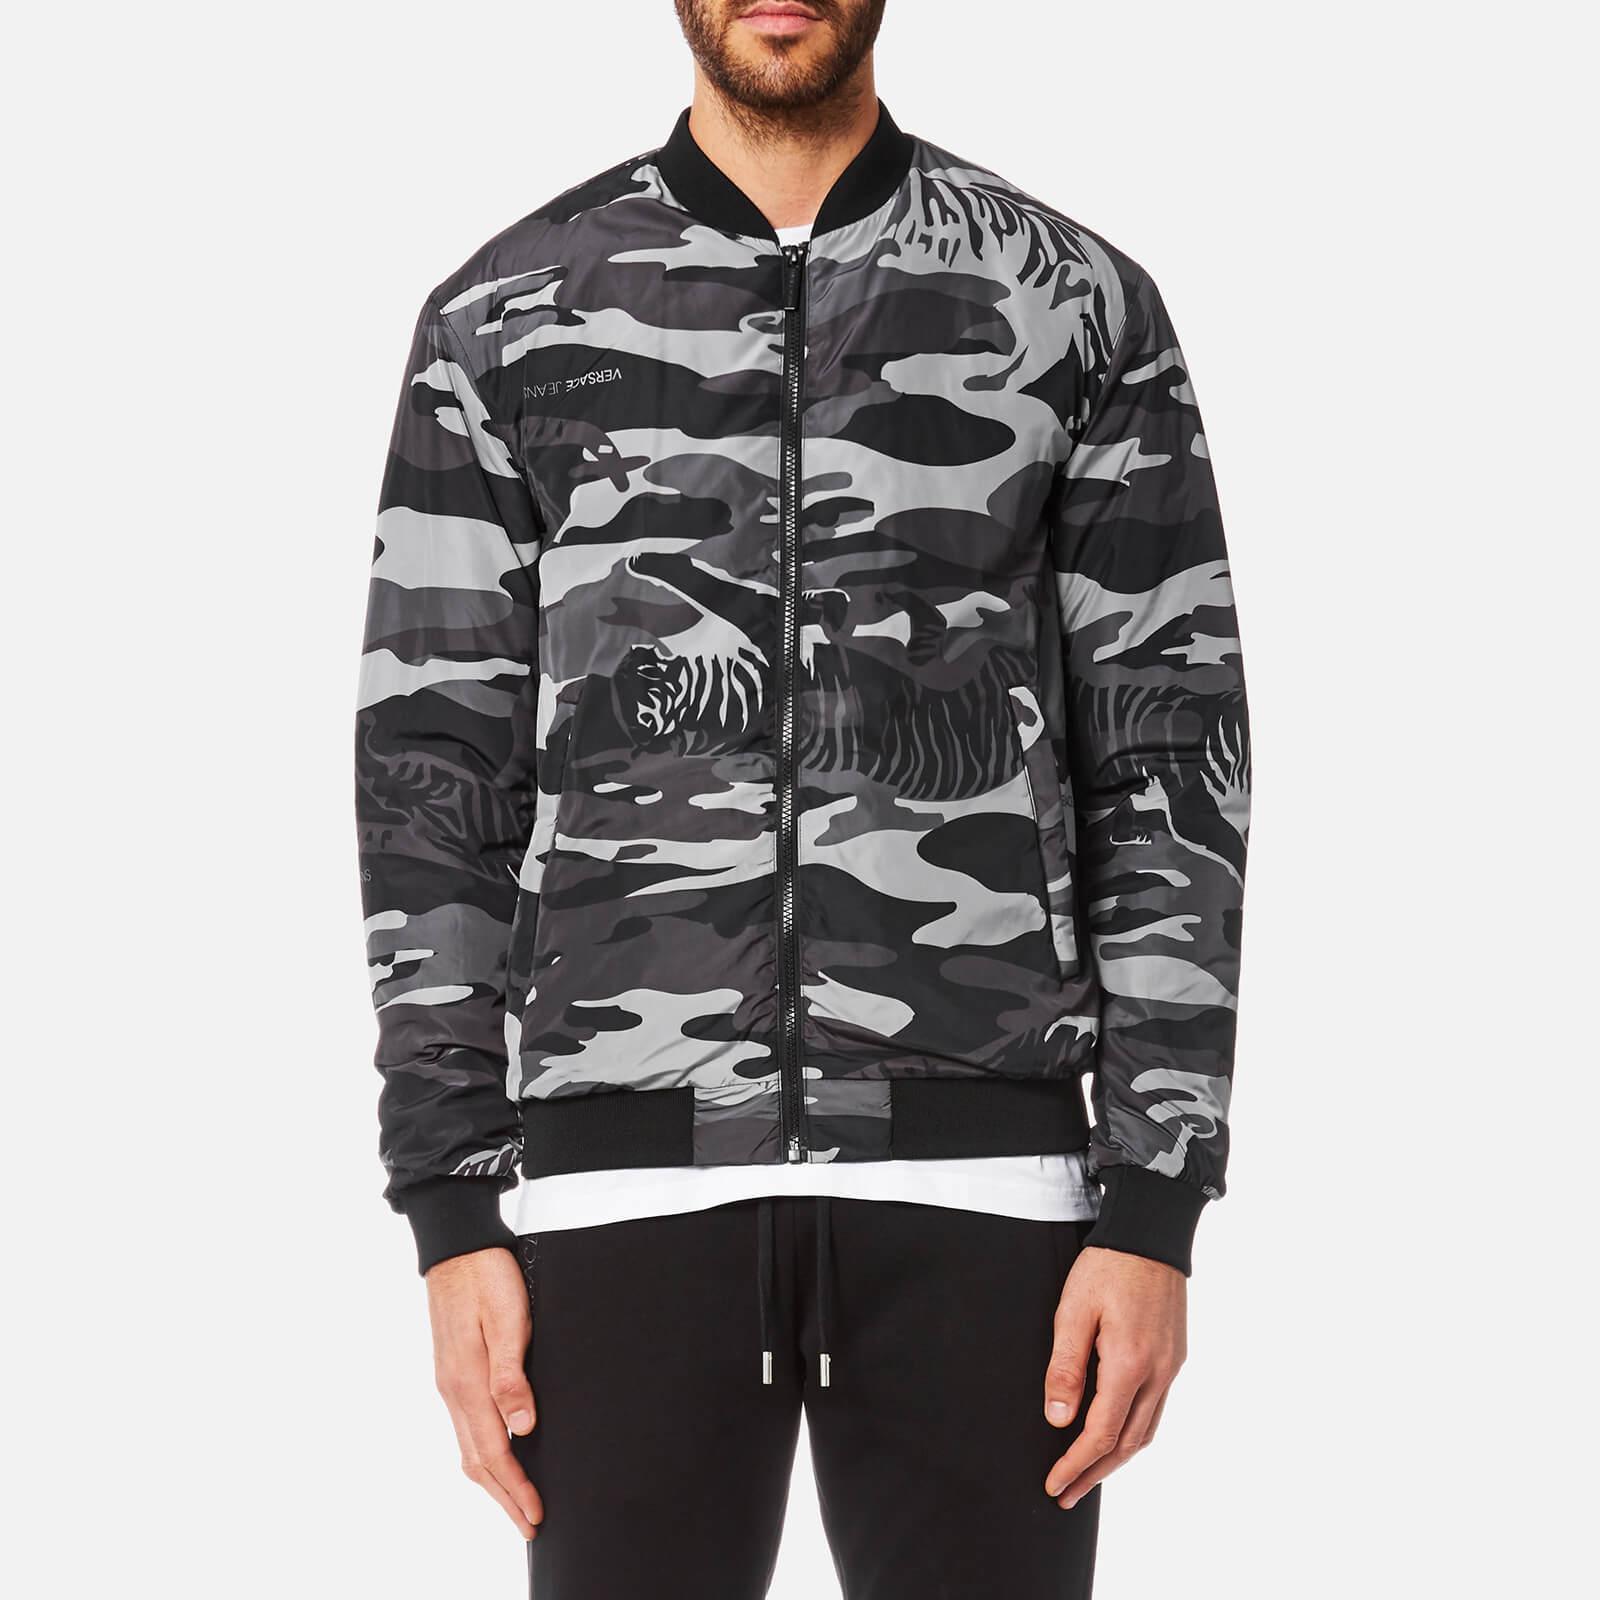 Lyst - Versace Jeans Camo Bomber Jacket in Gray for Men